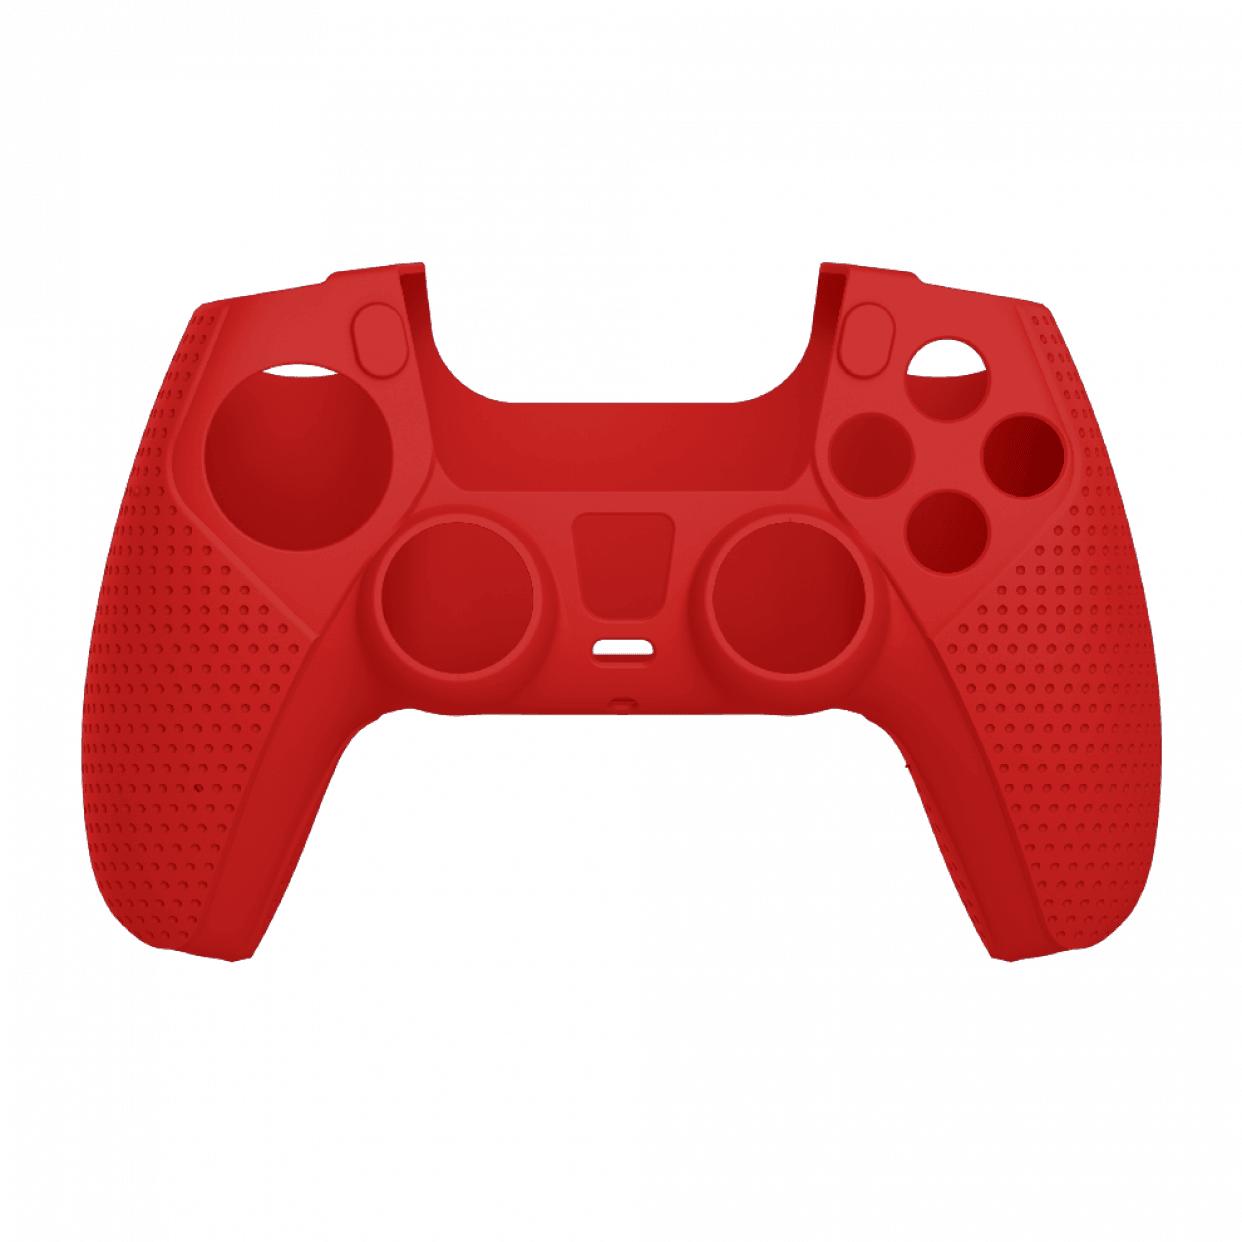 BODY LOCK Red Sillicone case for PS5 controller - GameStore.mt | Powered by Flutisat